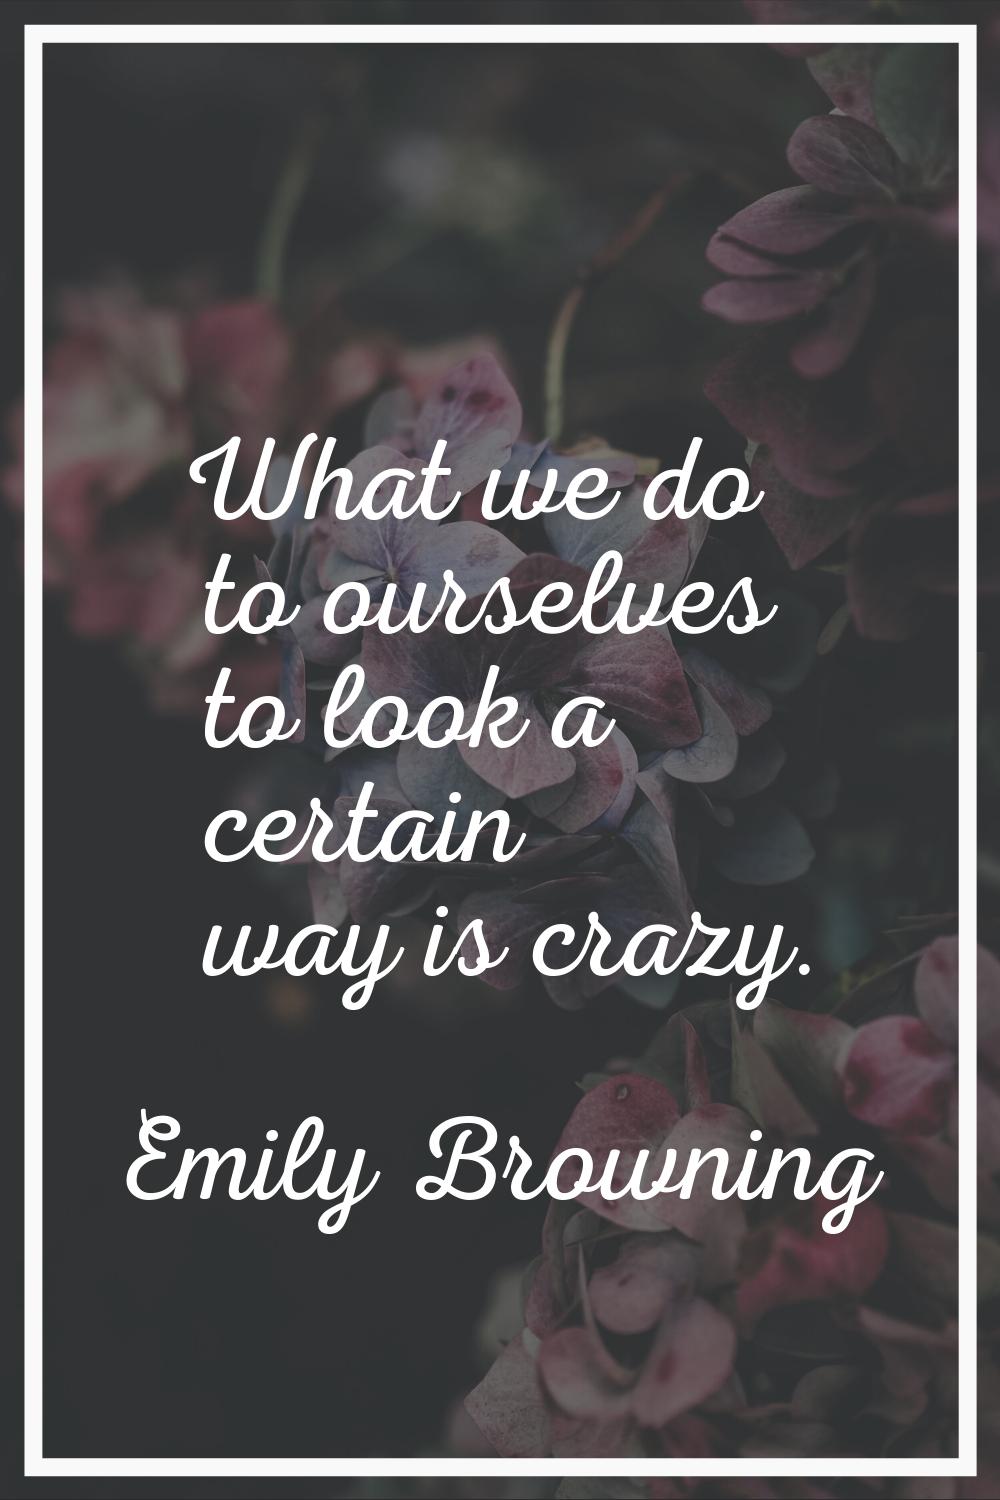 What we do to ourselves to look a certain way is crazy.